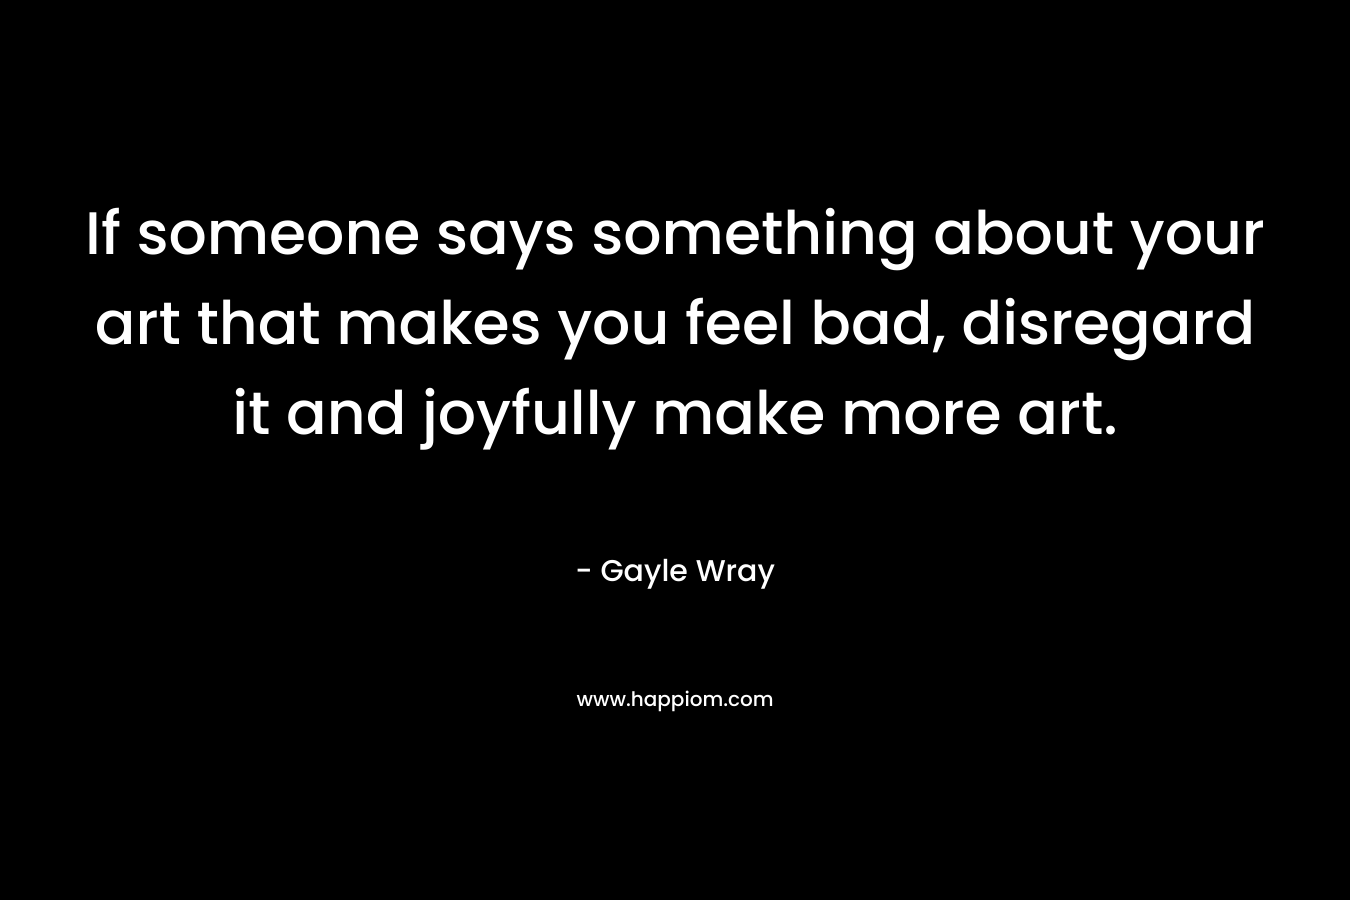 If someone says something about your art that makes you feel bad, disregard it and joyfully make more art. – Gayle Wray